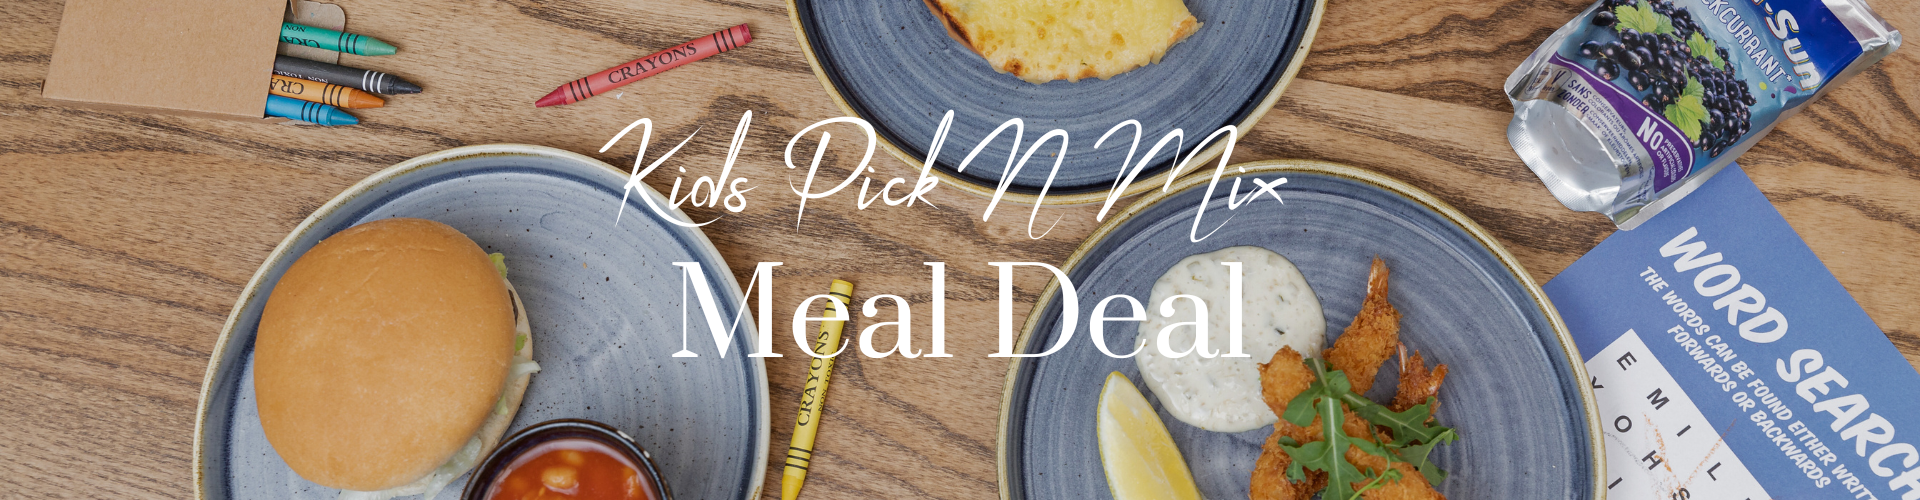 Kids Meal Deal available at The Stork Hotel